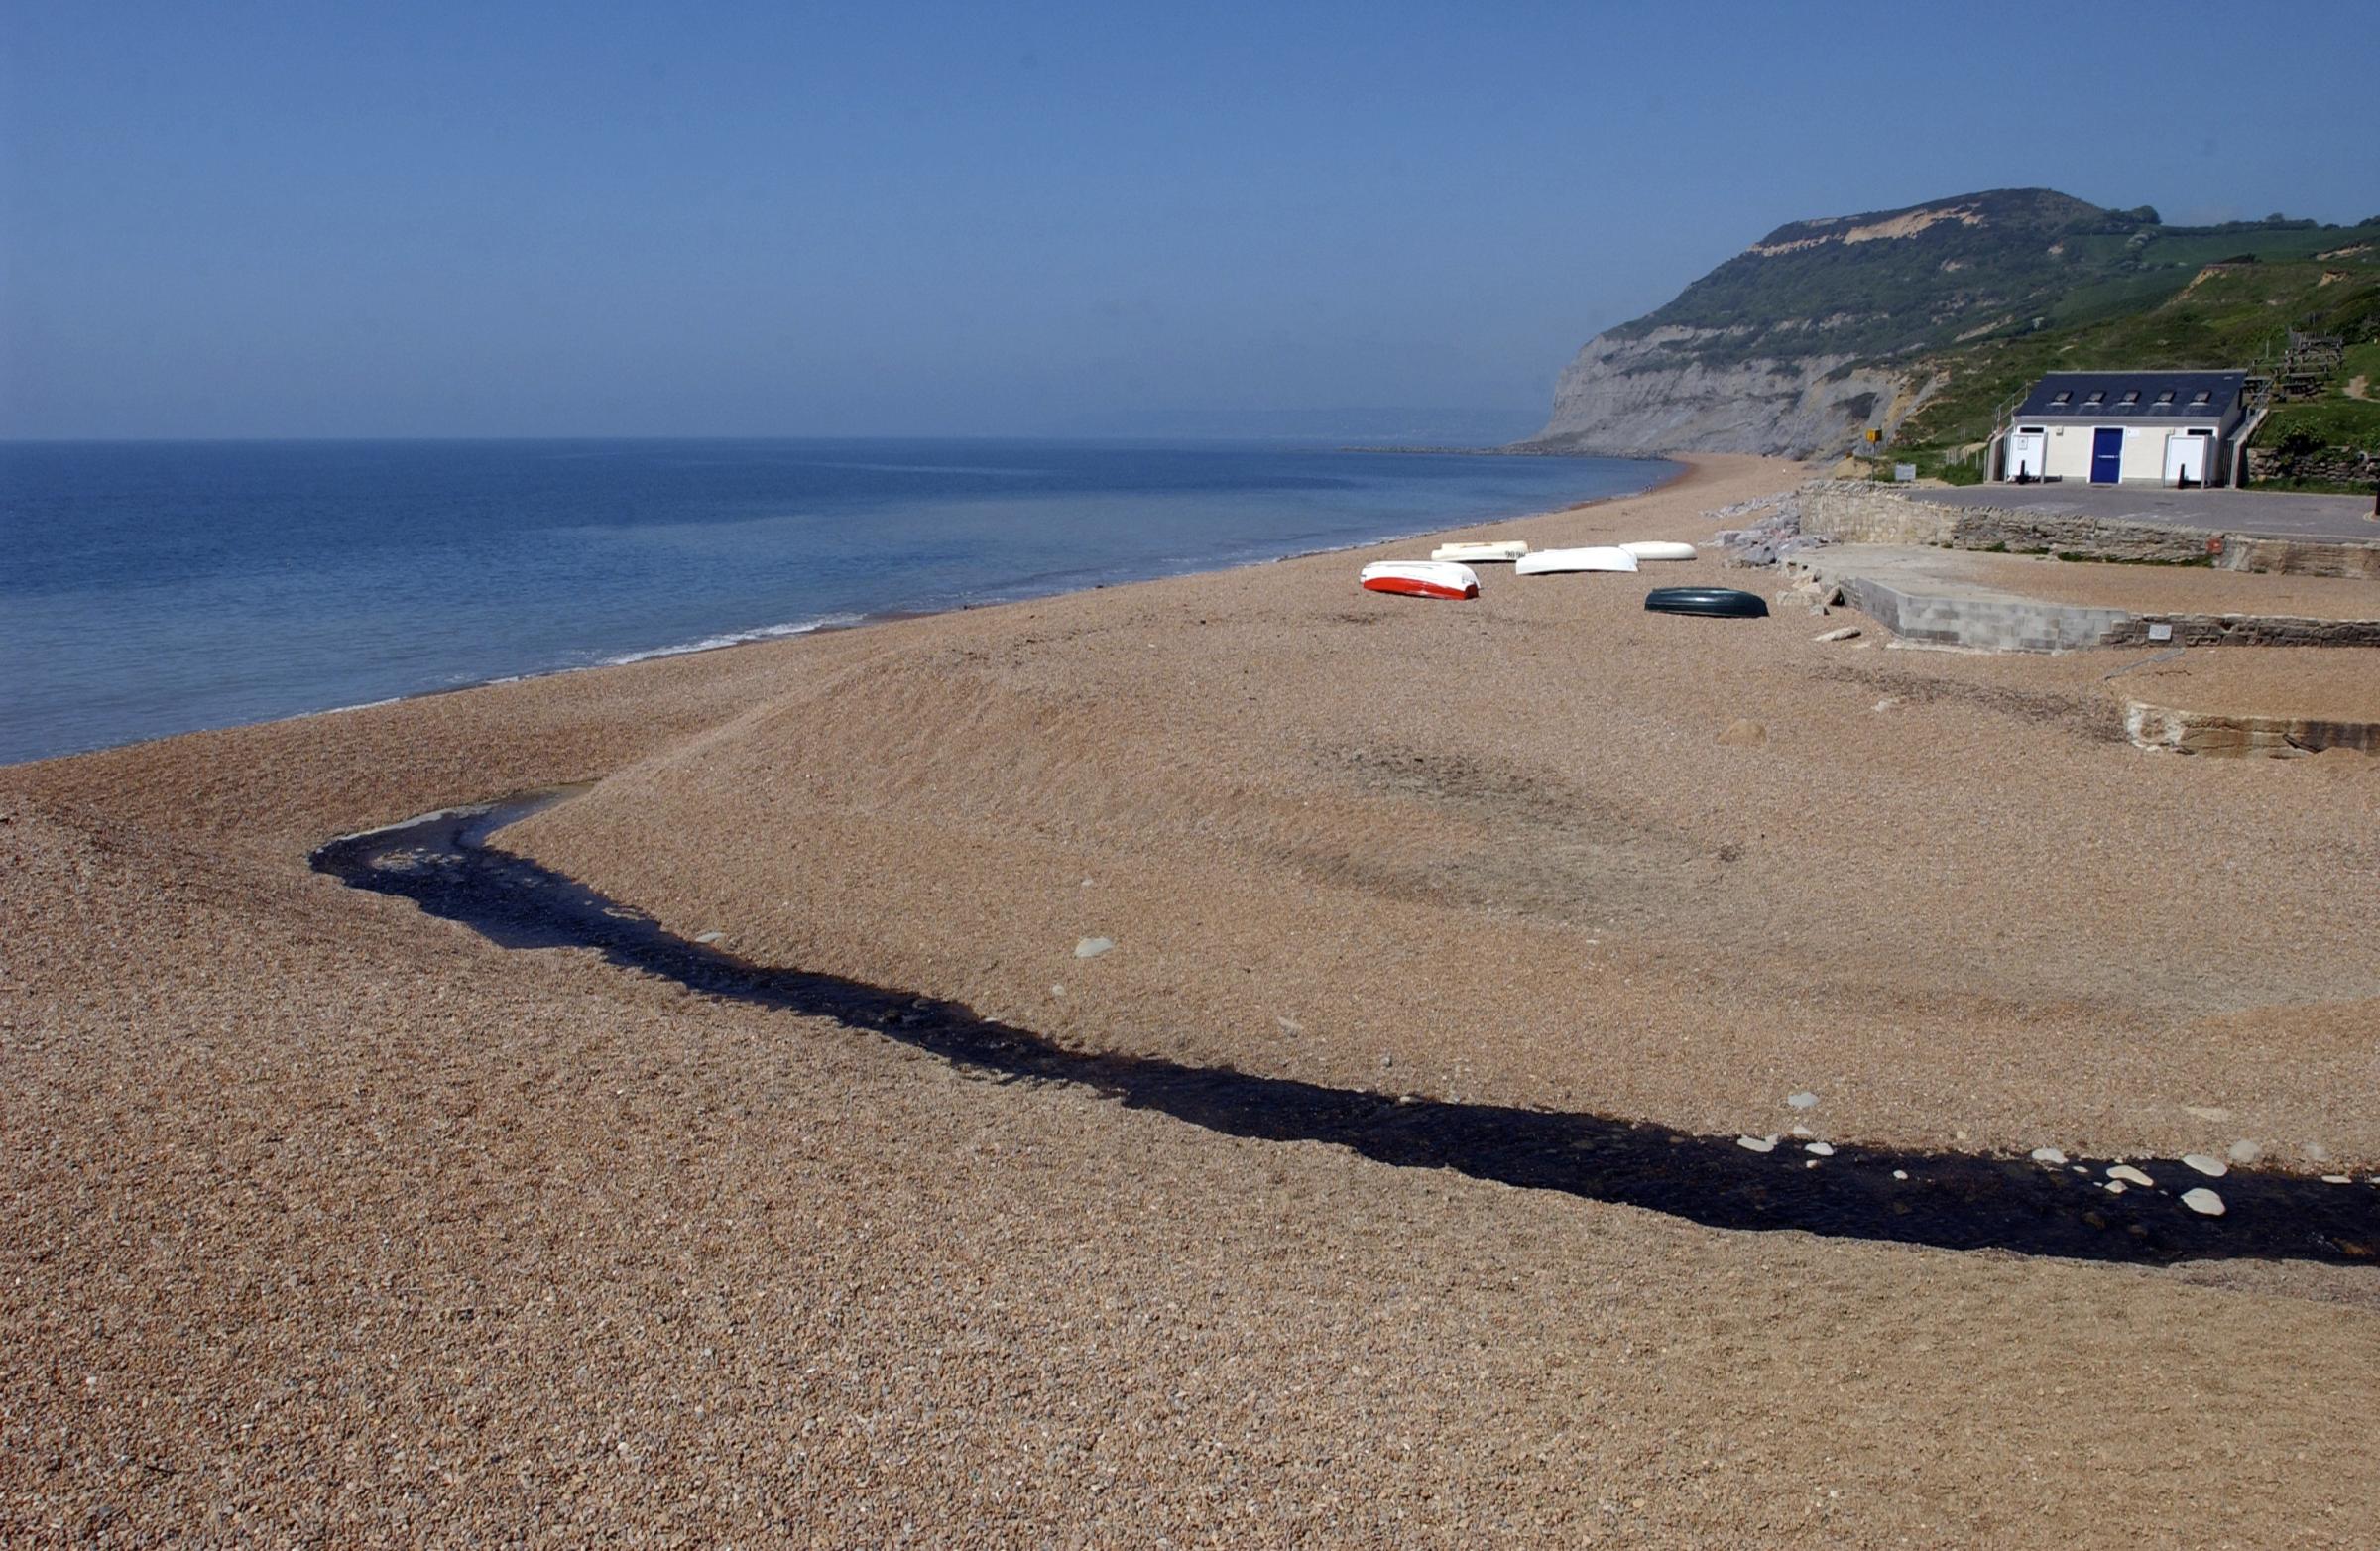 10-year-old girl rescued after getting into difficulties in the sea – Dorset Echo